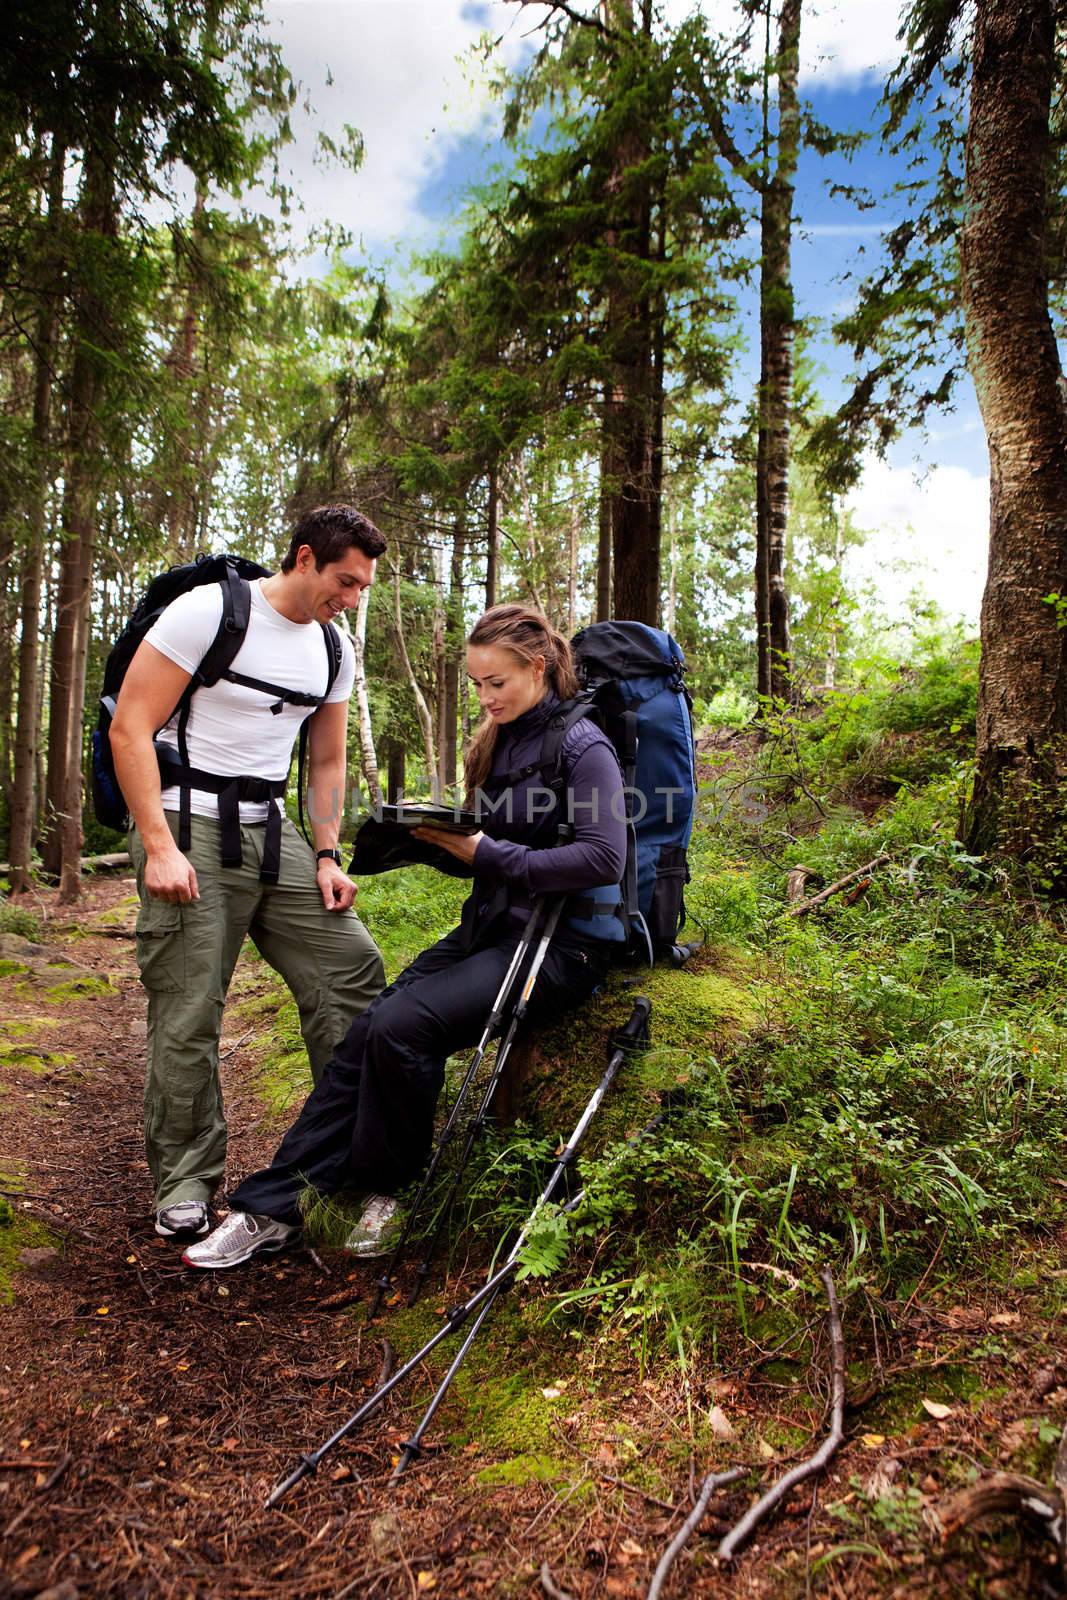 A couple backpack camping in the forest looking at a map